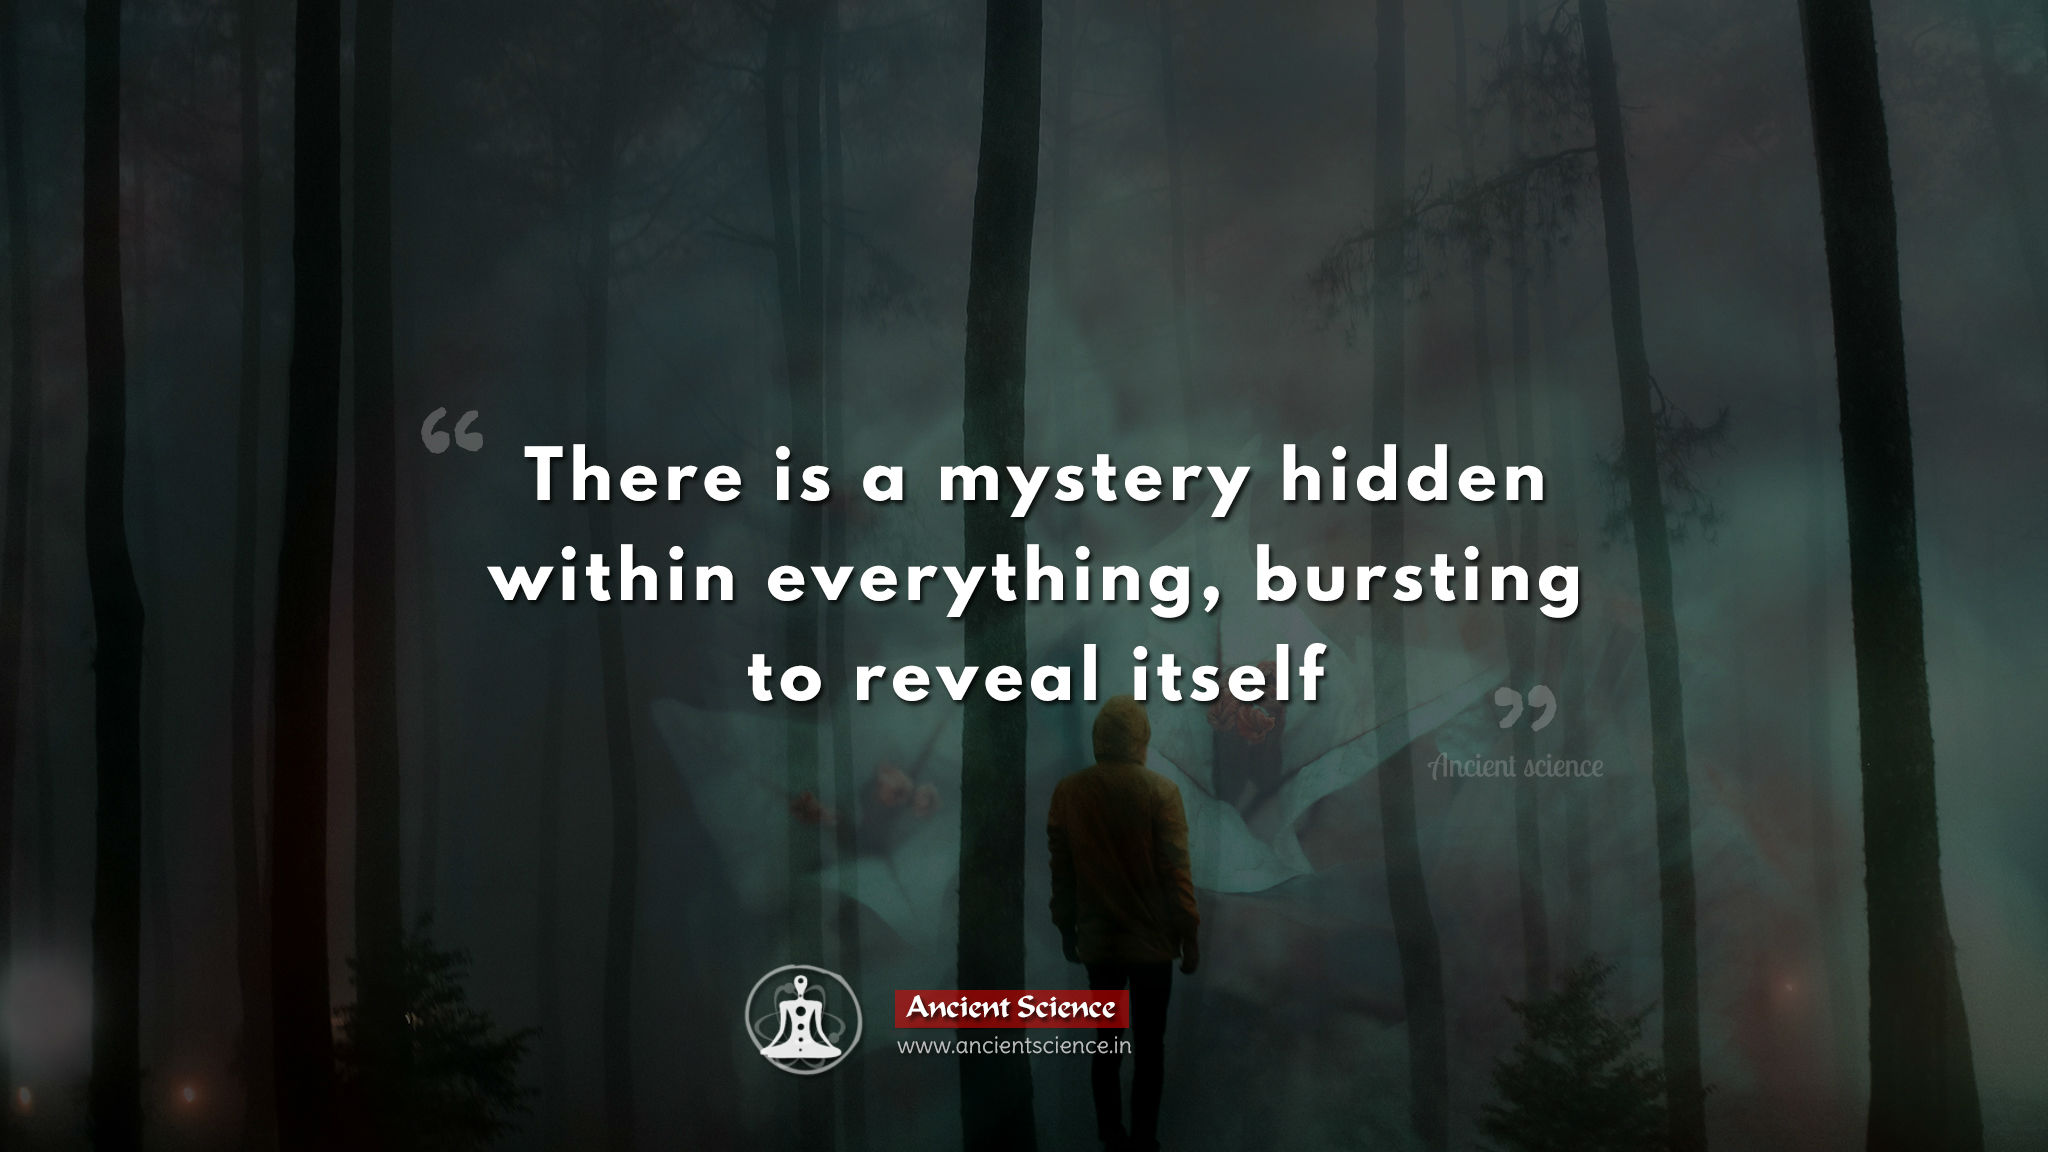 There is a mystery hidden within everything, bursting to reveal itself